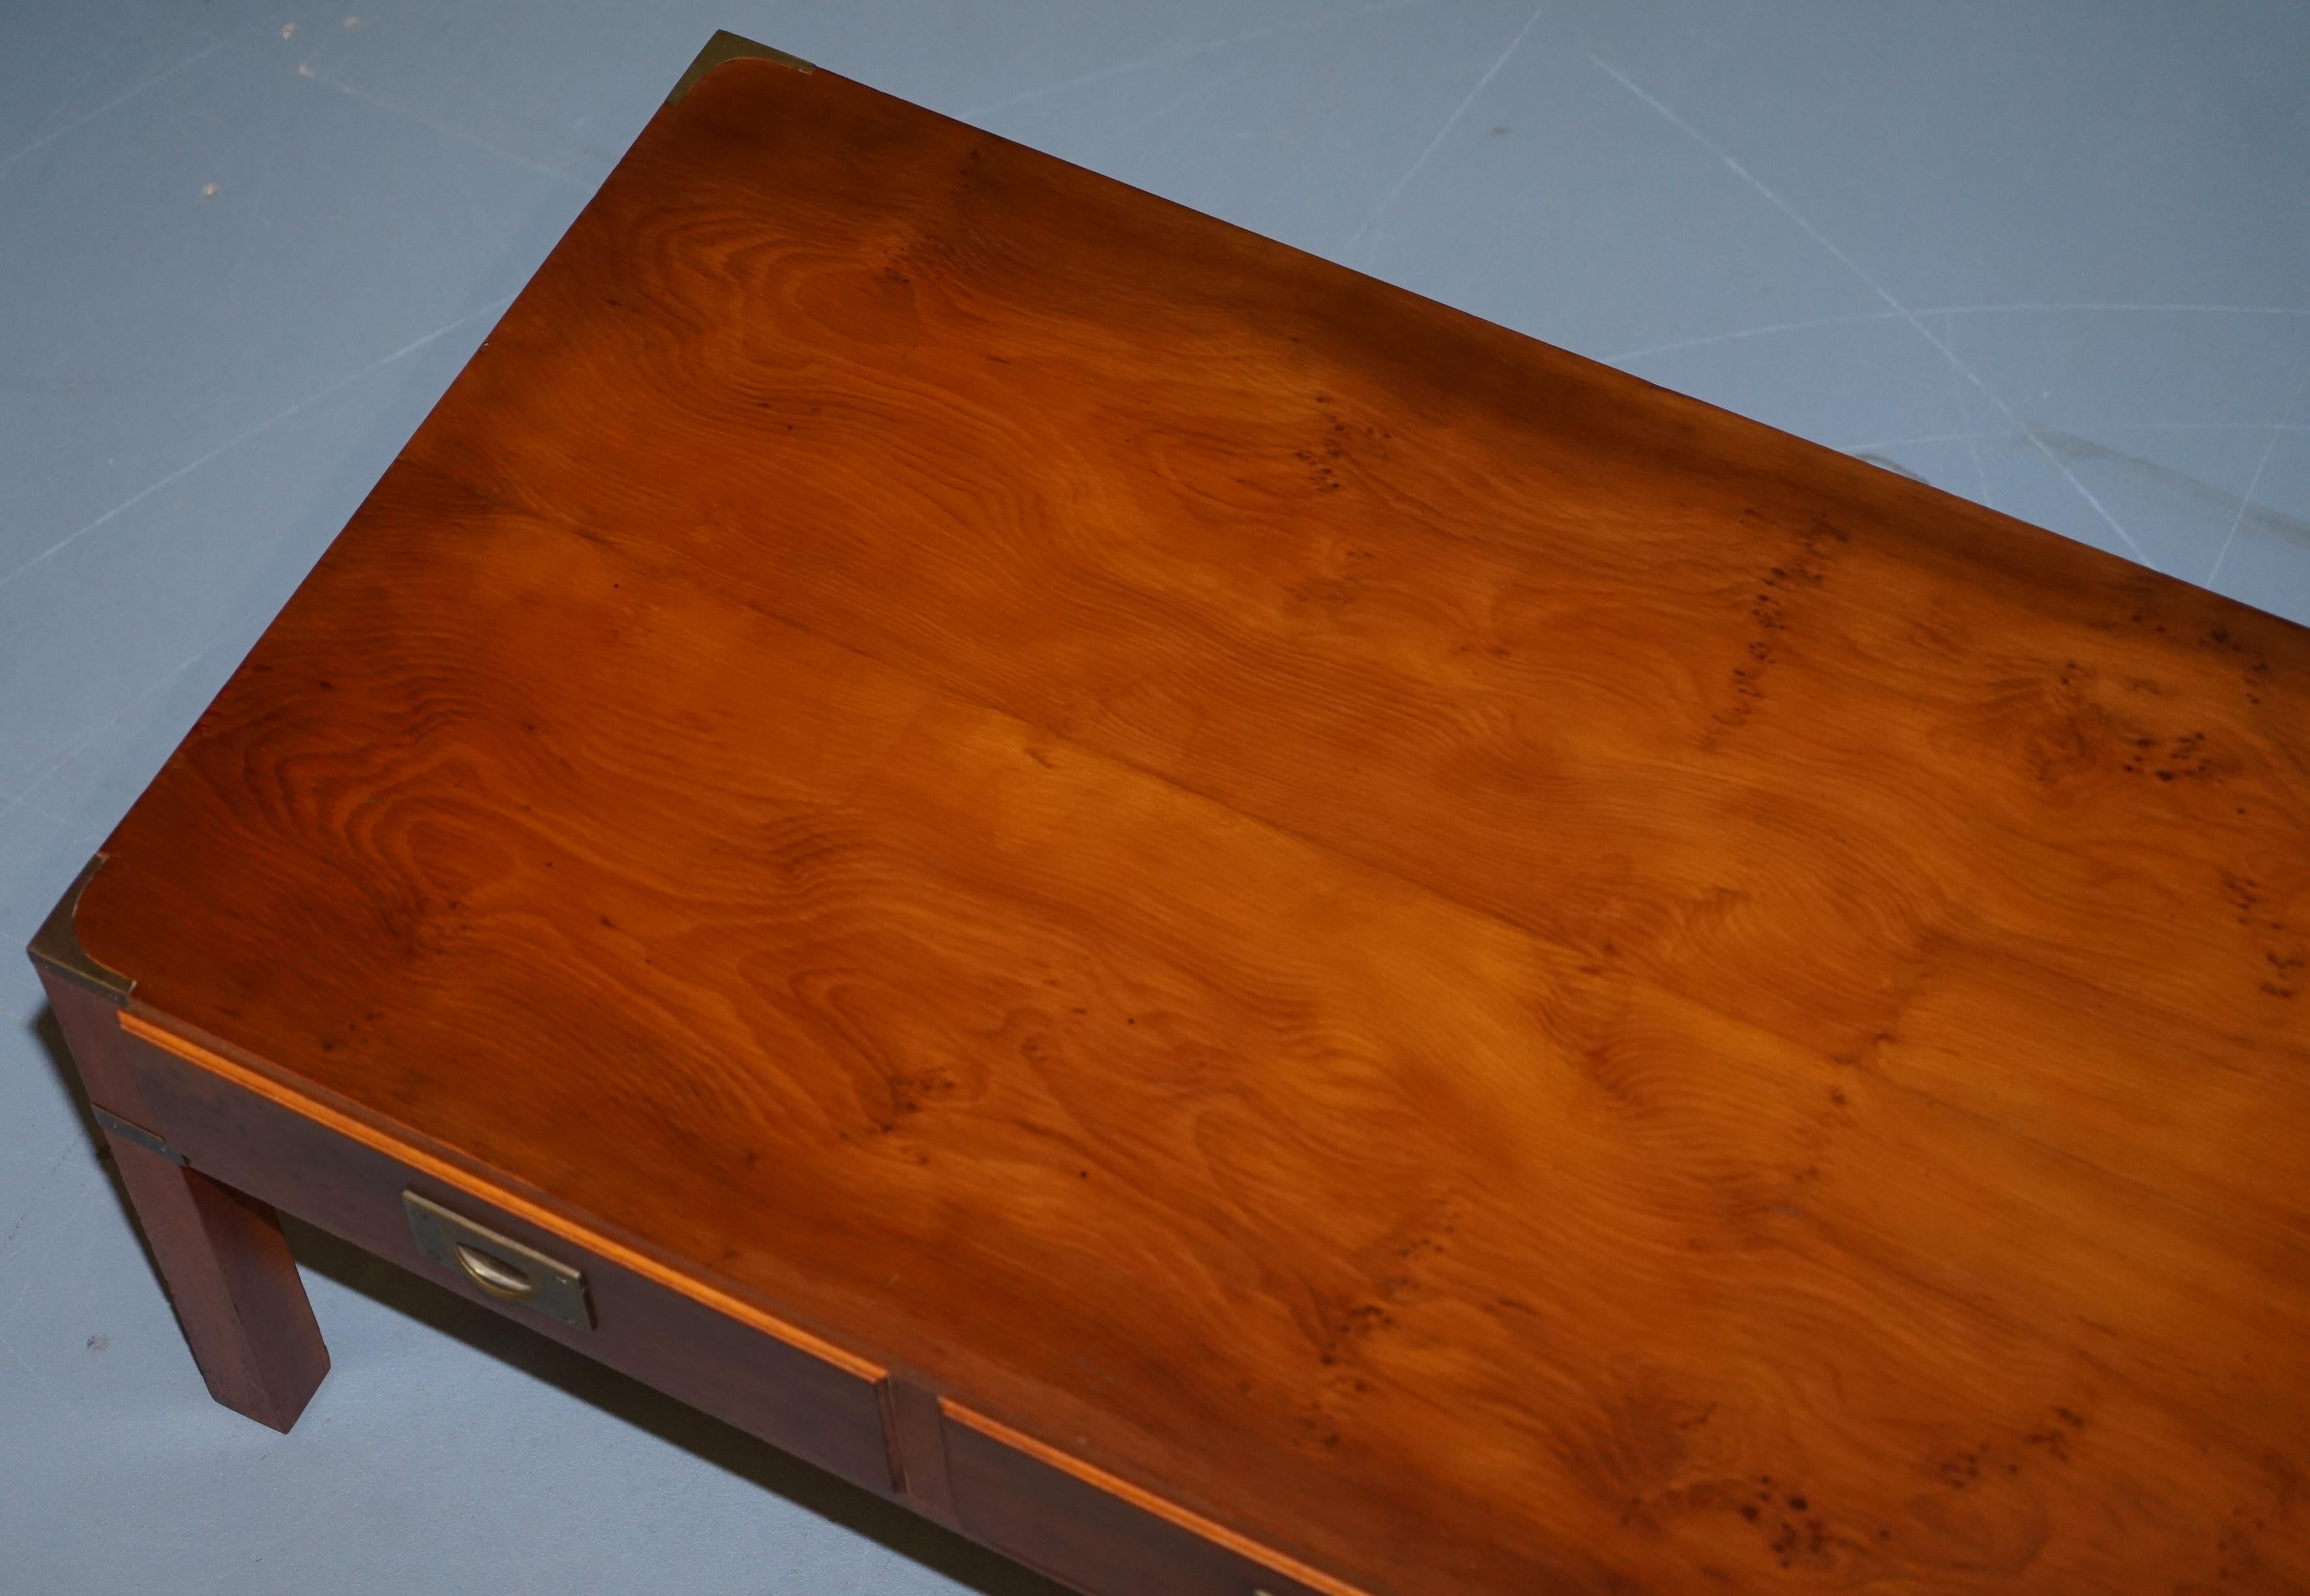 Hand-Crafted Stunning Burr Elm Harrods Kennedy Military Campaign Coffee Table Three Drawers